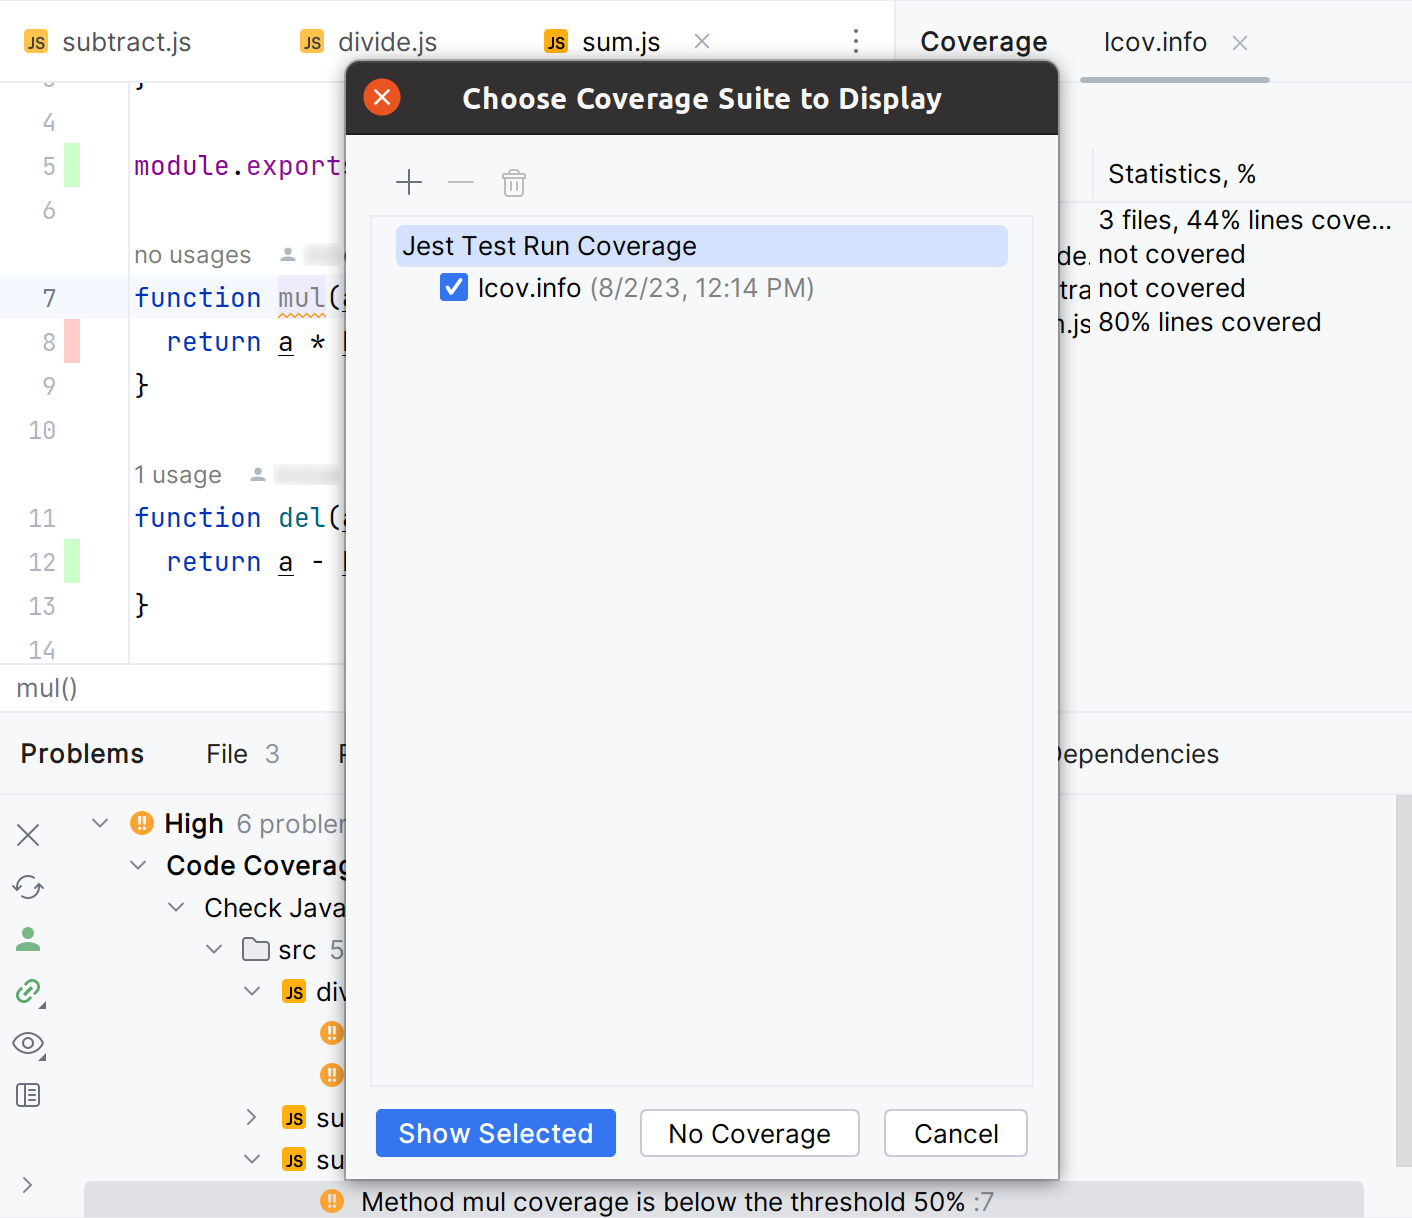 The Choose Coverage Suite to Display dialog